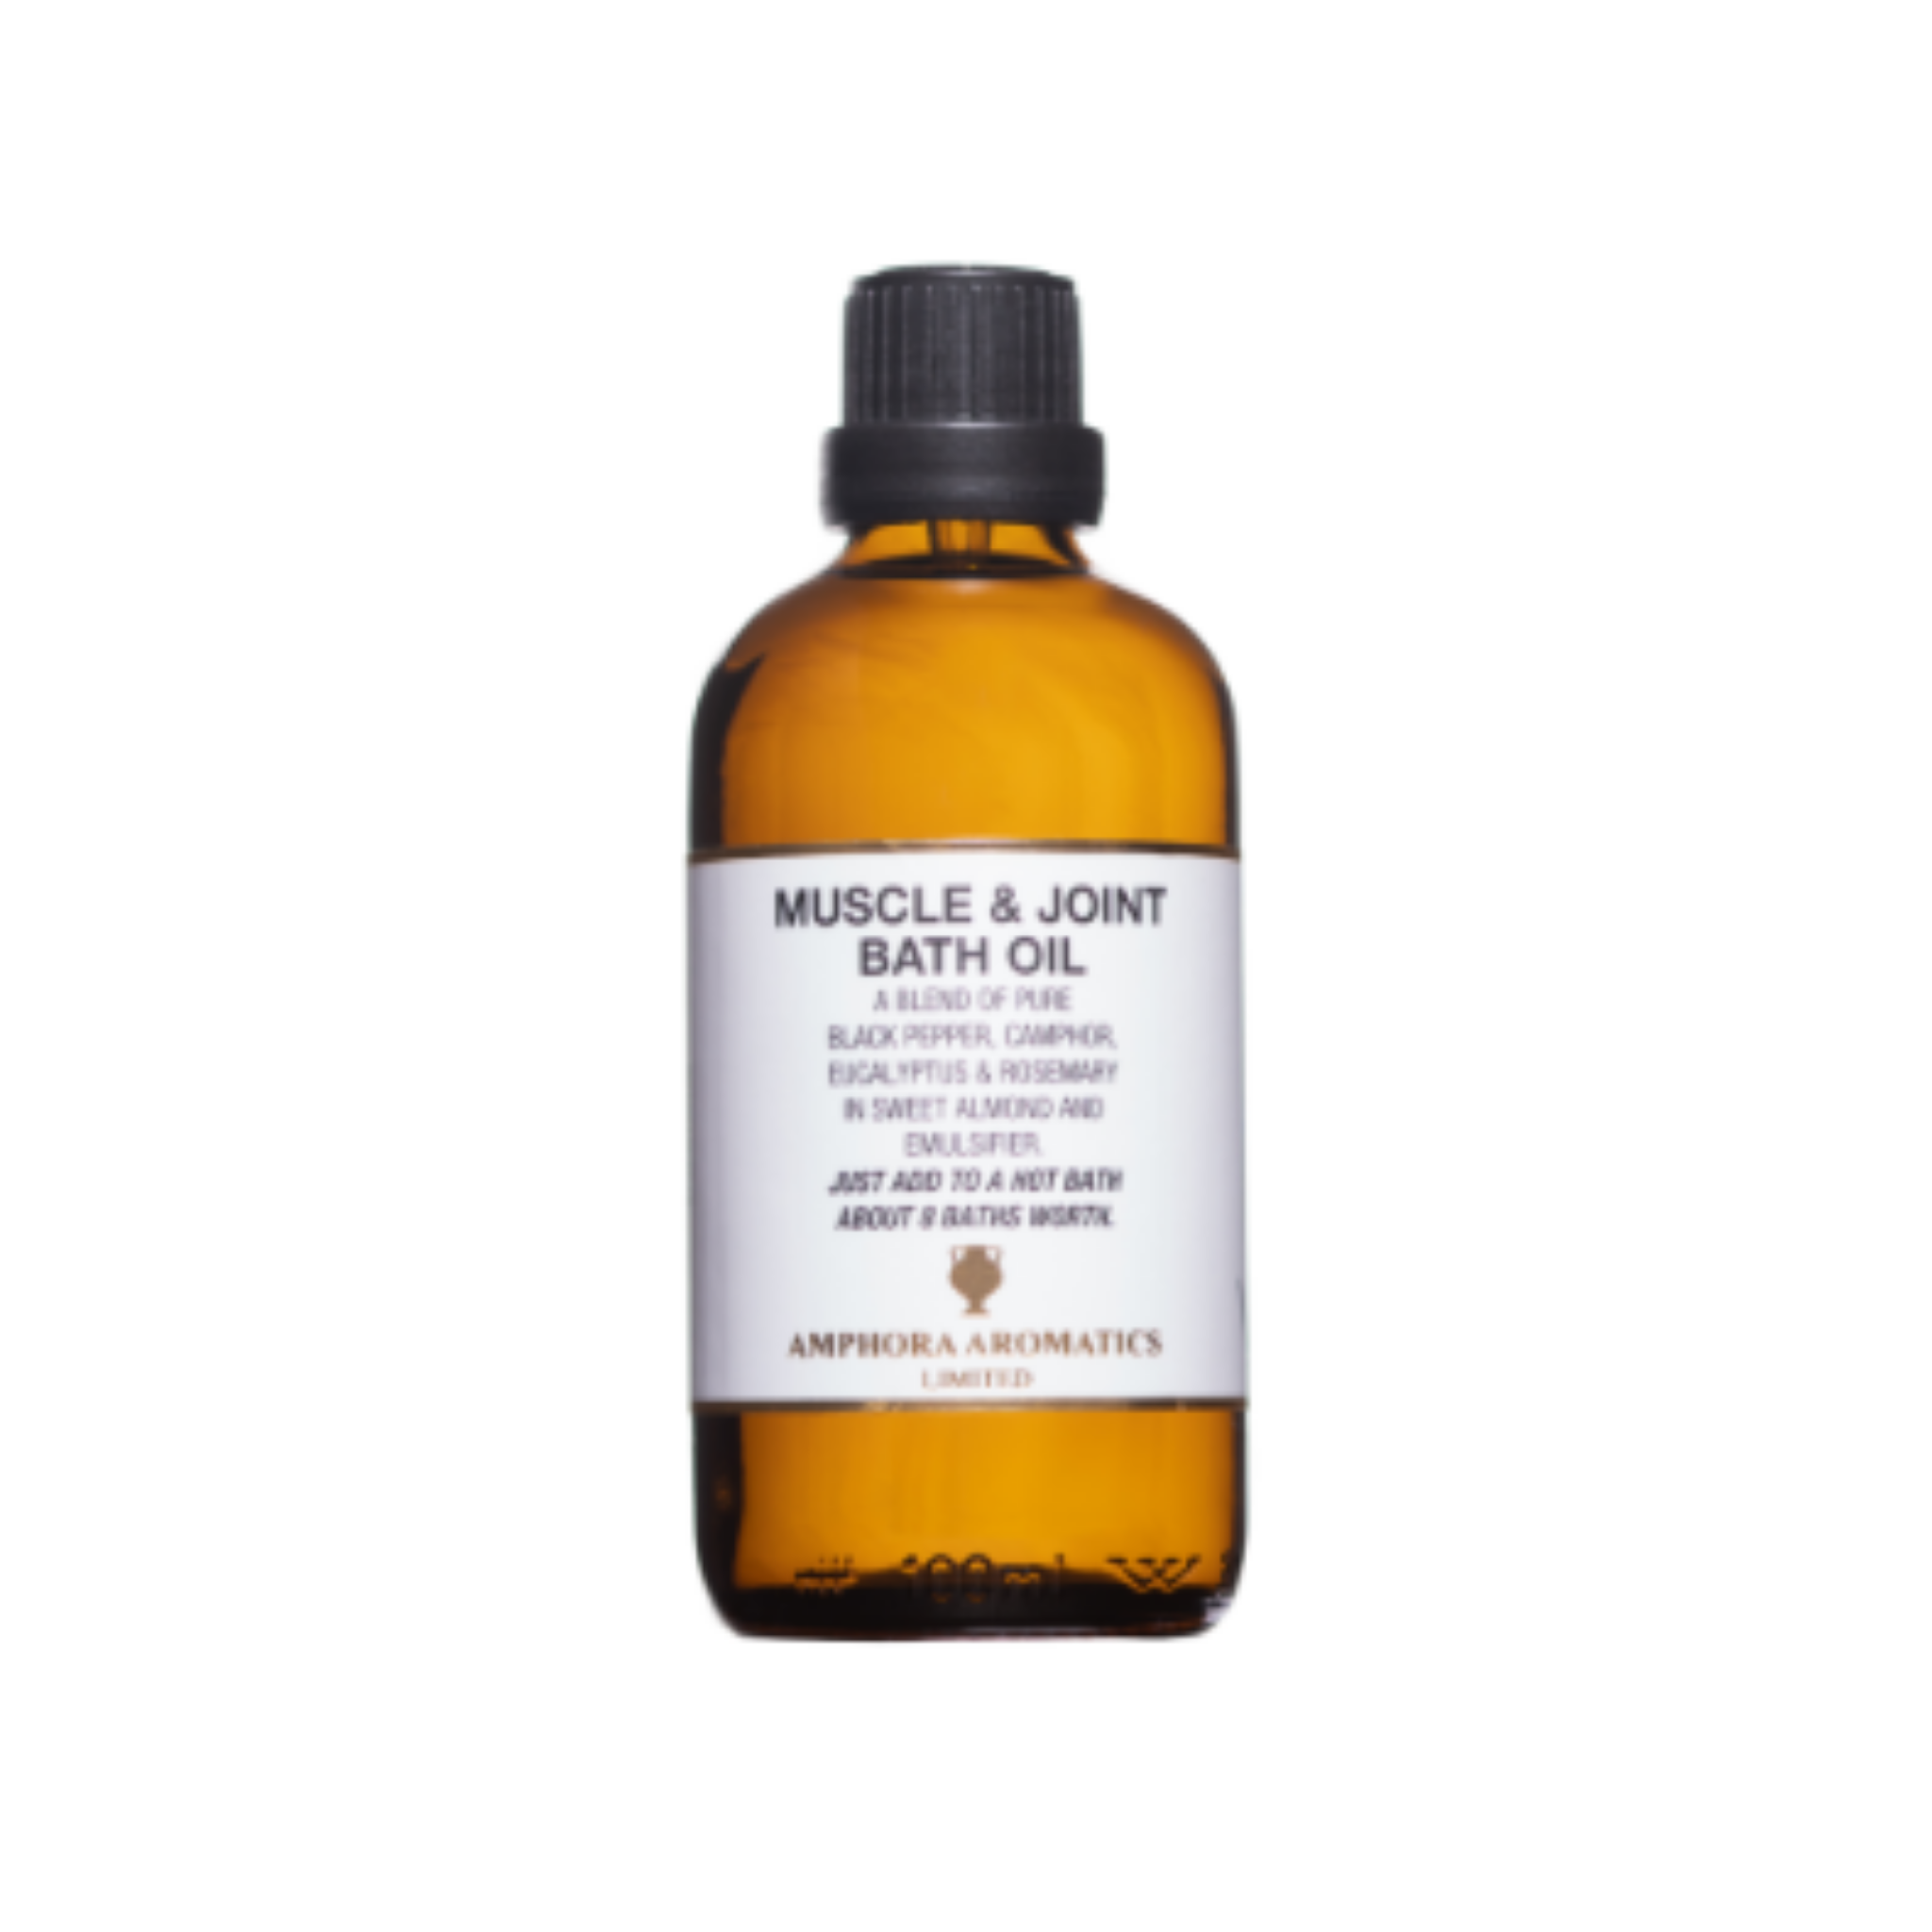 Muscle & Joint Bath Oil by Amphora Aromatics